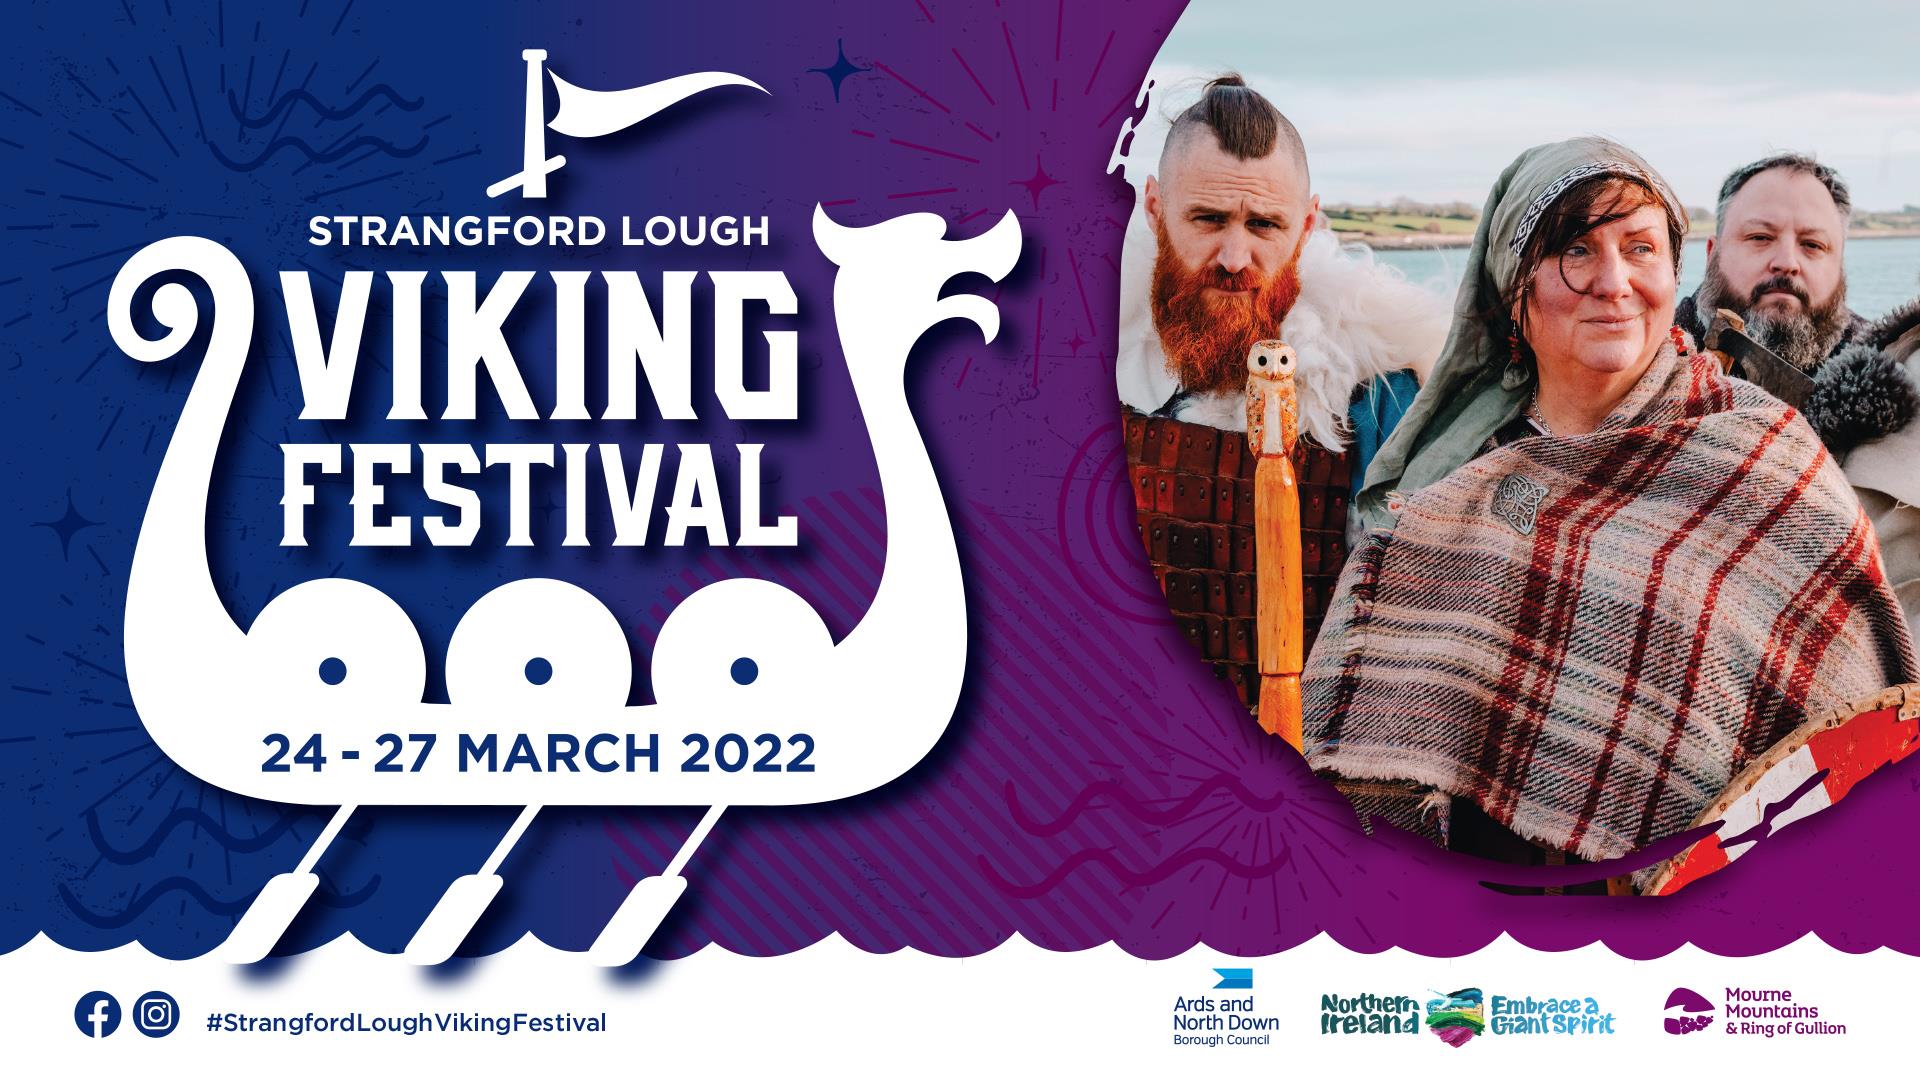 Event poster visual featuring three Viking characters and event details. Images supplied by Lakes Vikings, photo credit to Ciara McMullen Photography.